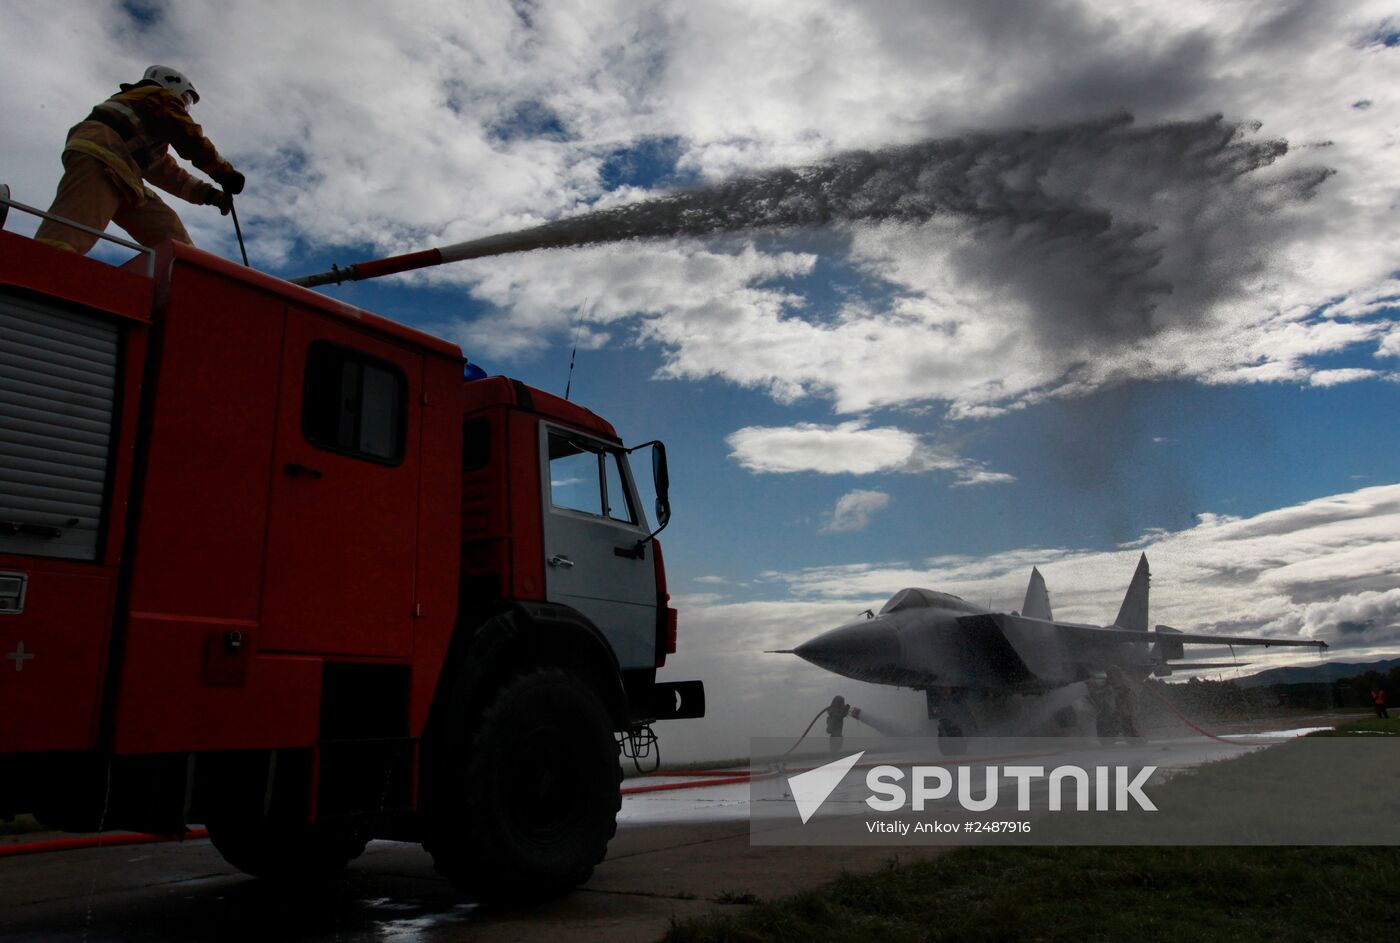 Exercise involving units of the Eastern Military District's logistics-support system